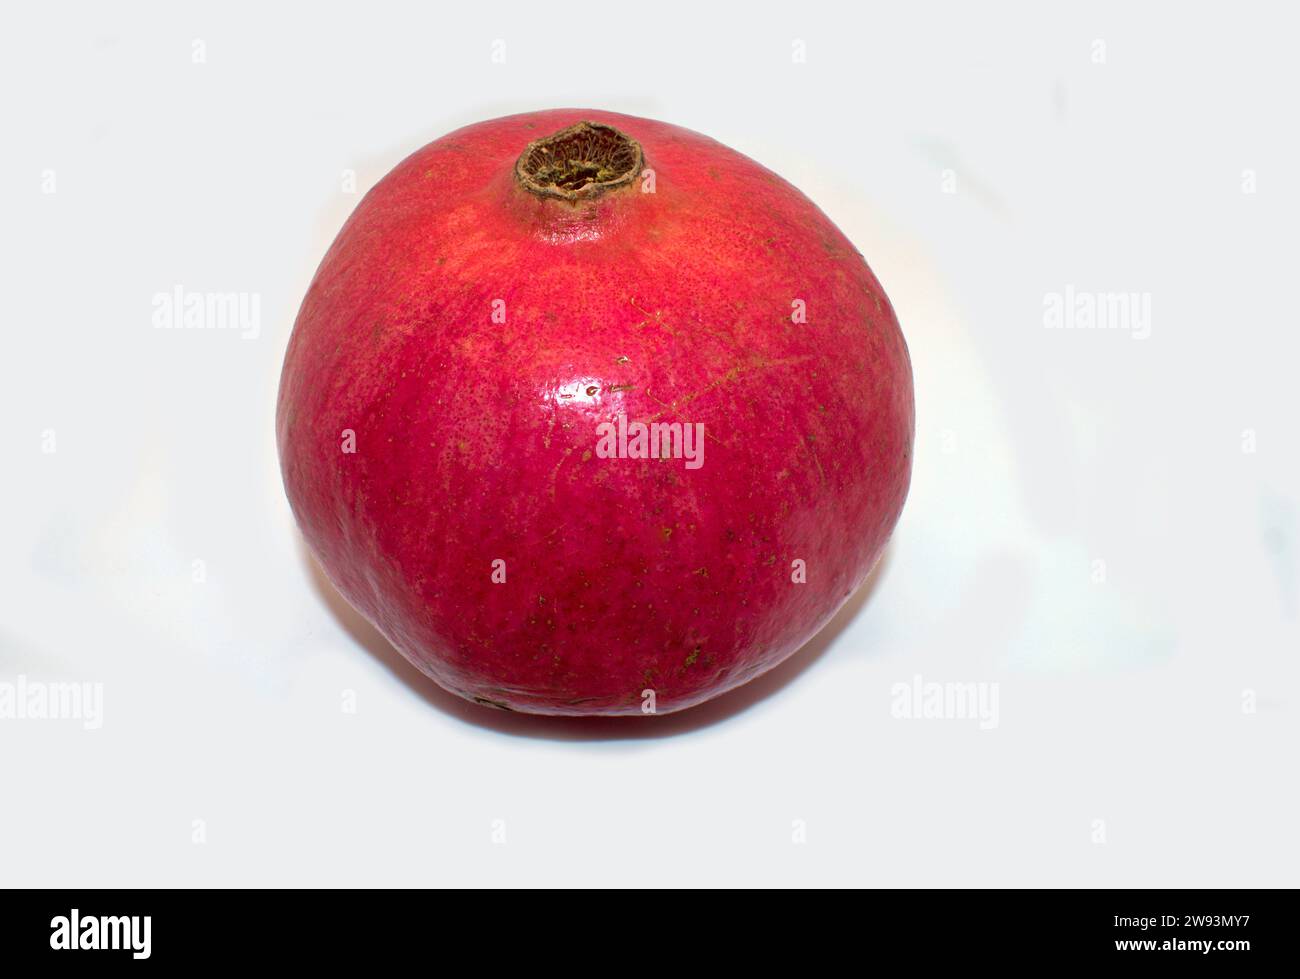 Single bright red pomegranate fruit, also known as Chinese apple, on a plain white background -01 Stock Photo